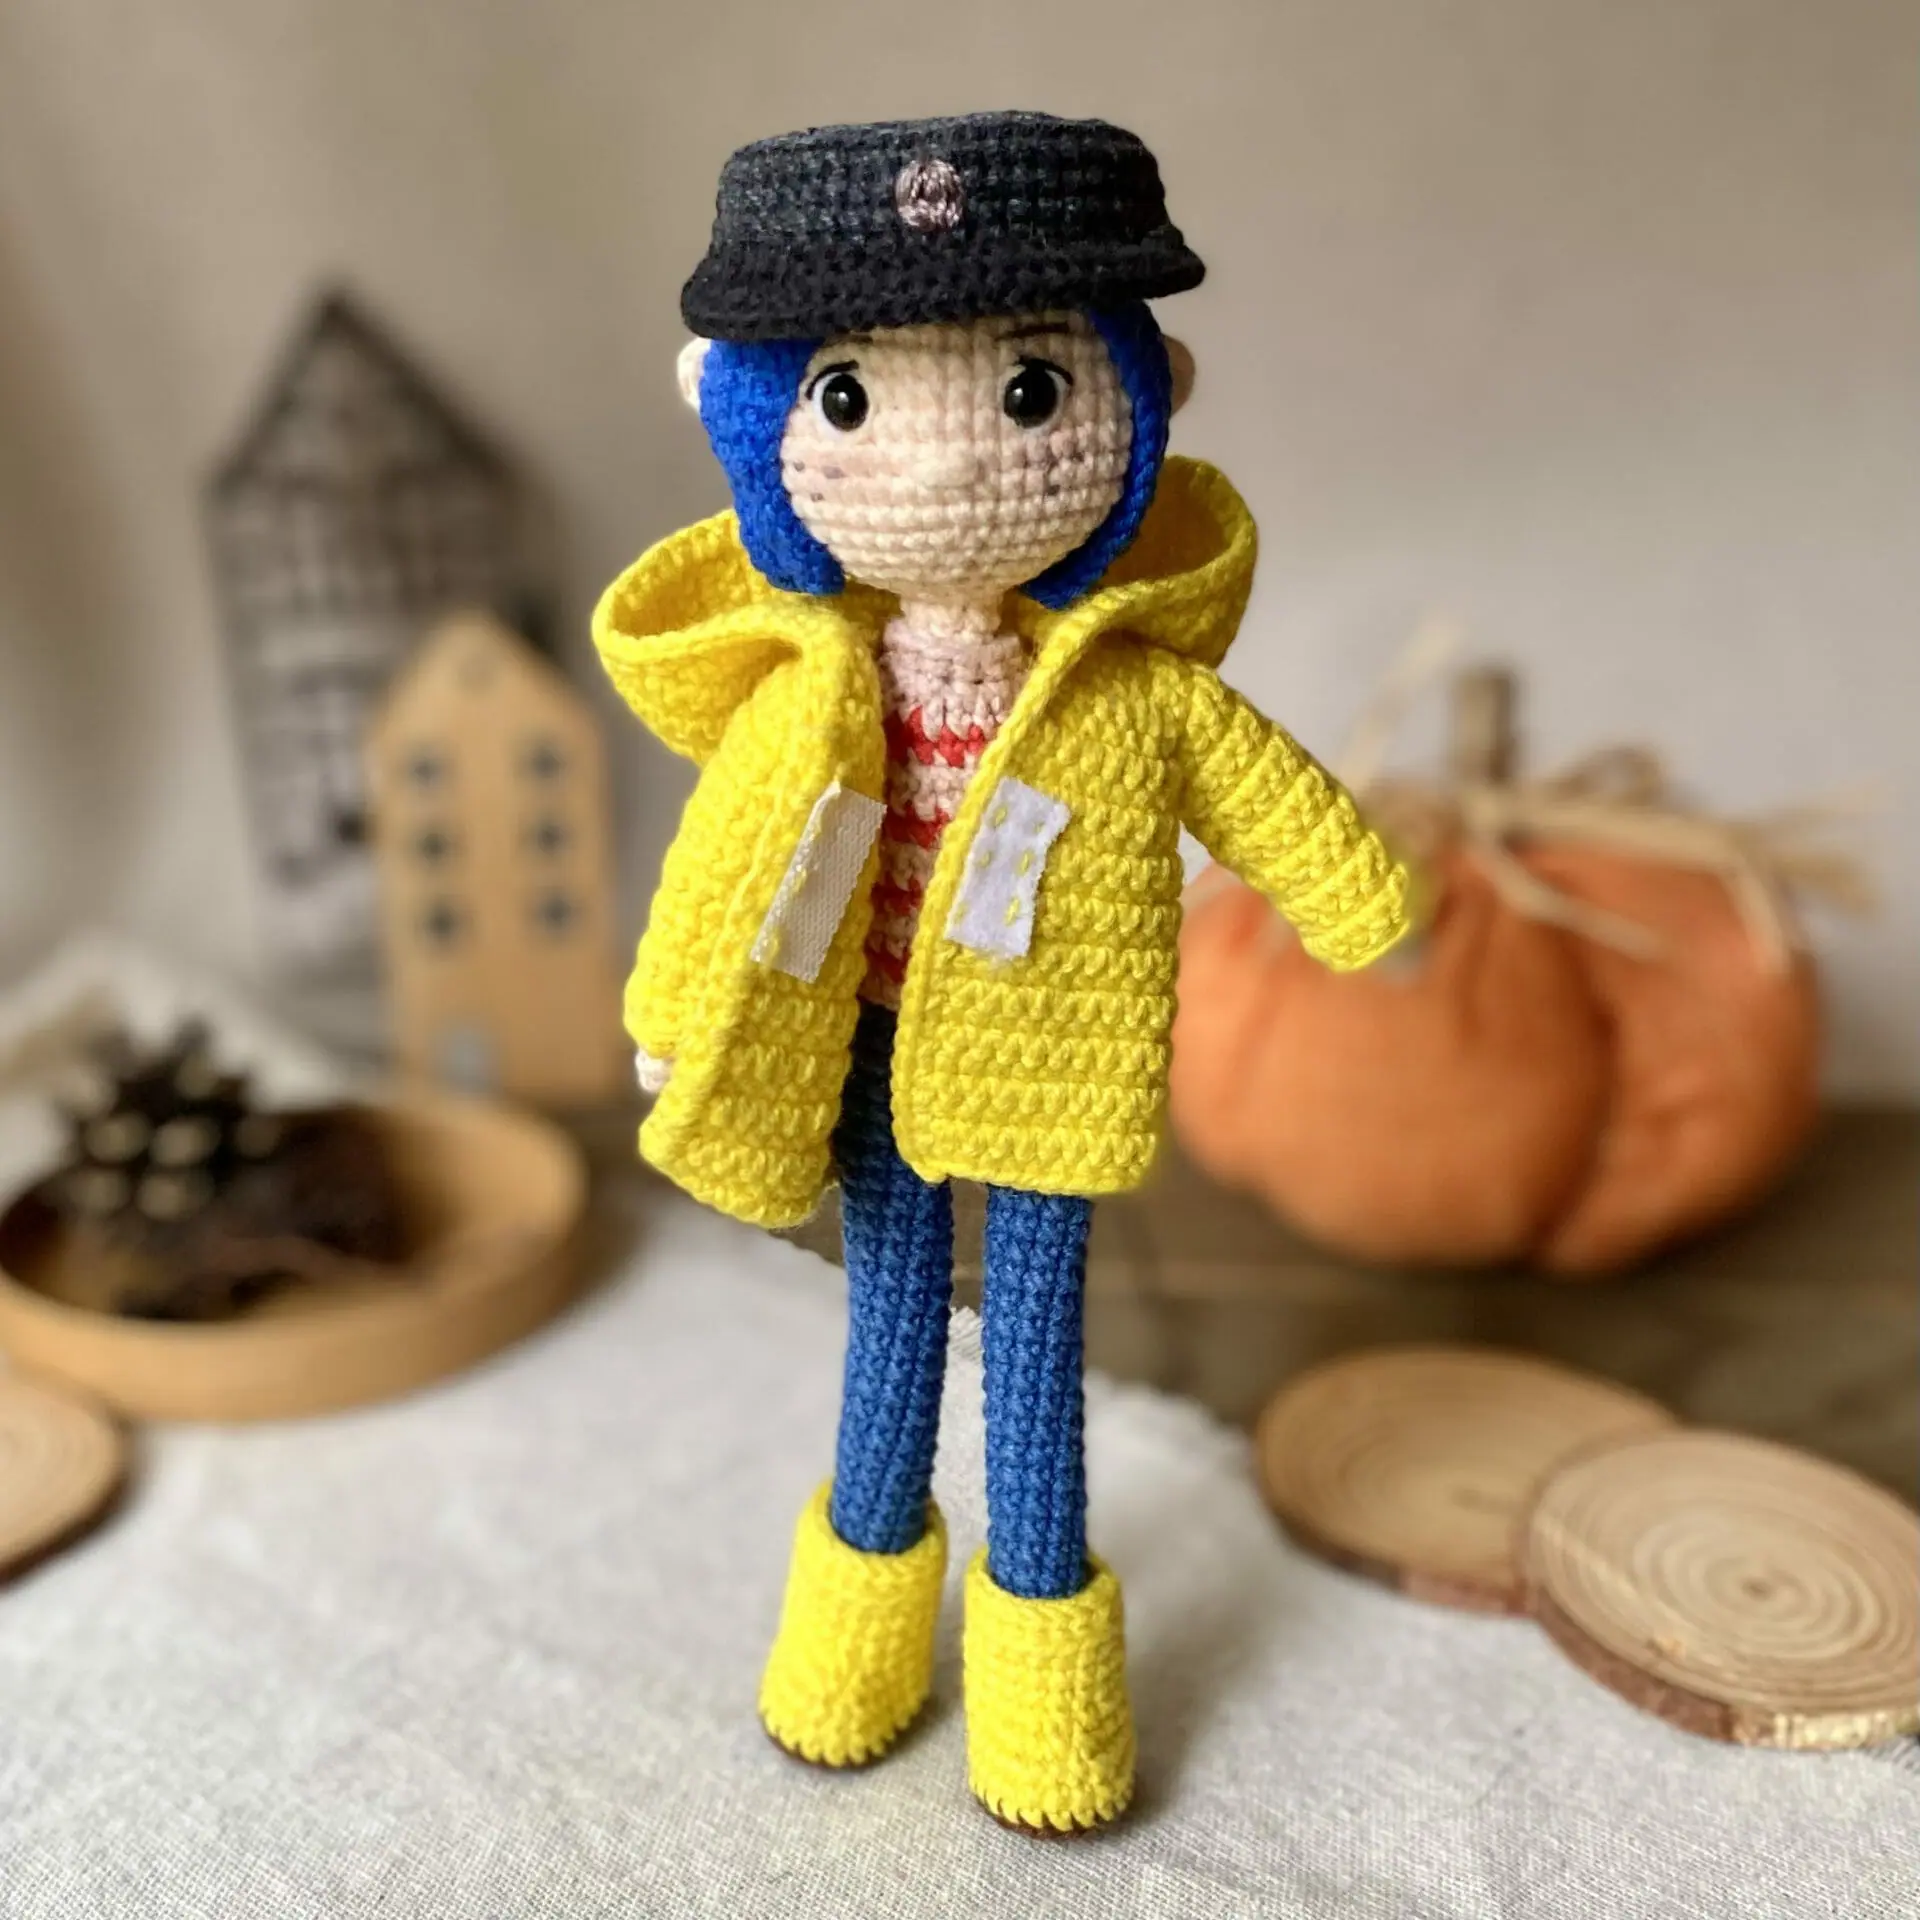 Crochet Doll Coraline With Button Eyes or Regular Eyes 